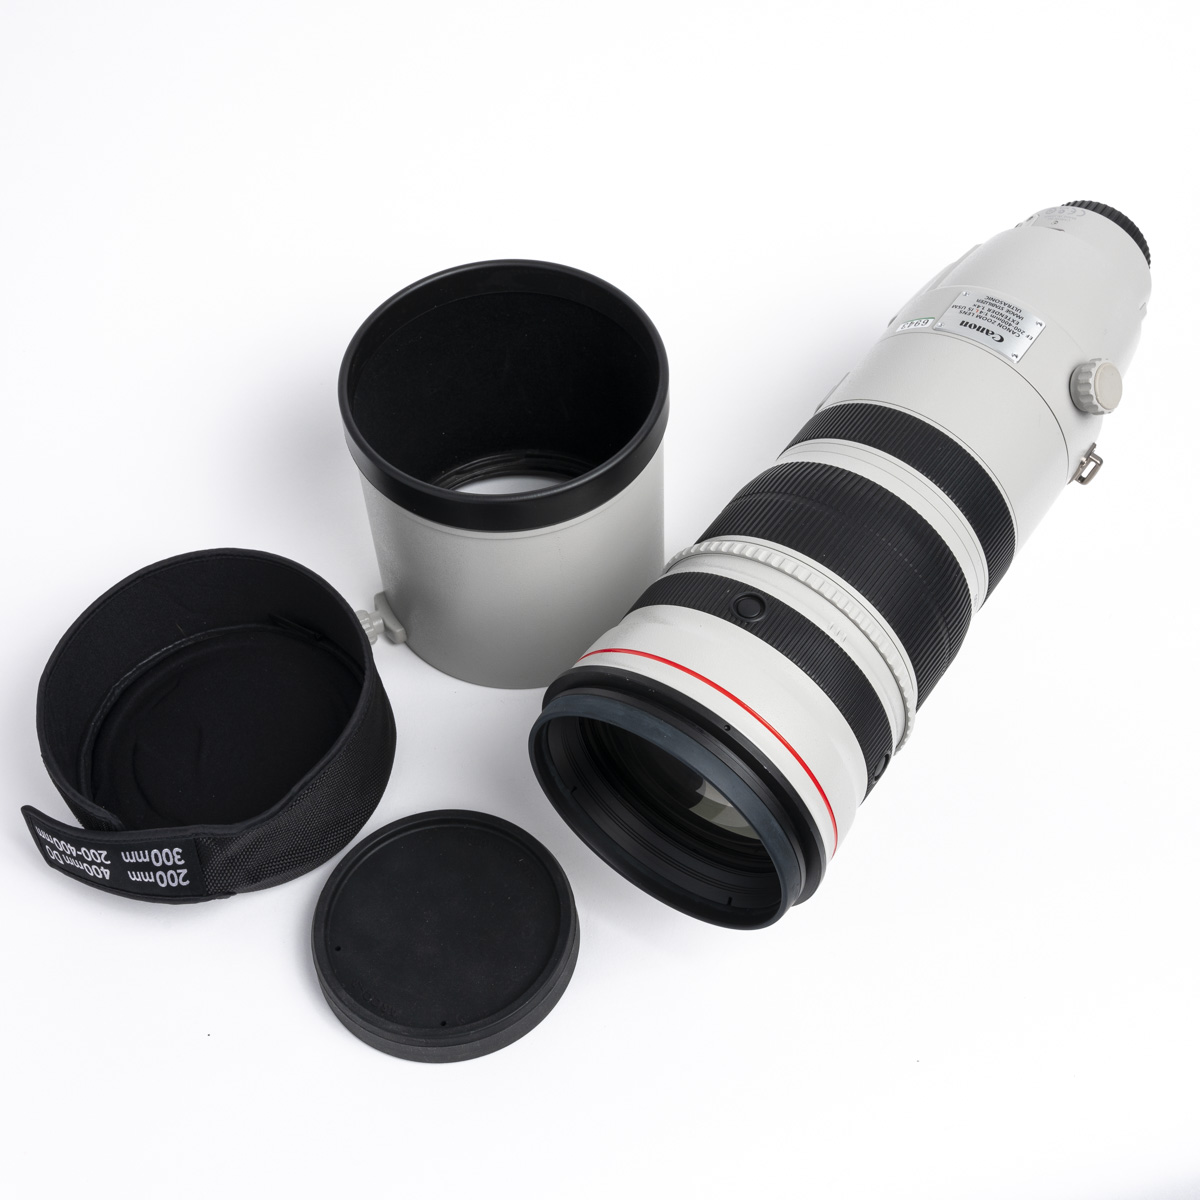 Used Canon EF 200-400 f4 L IS USM lens w/1.4x extender